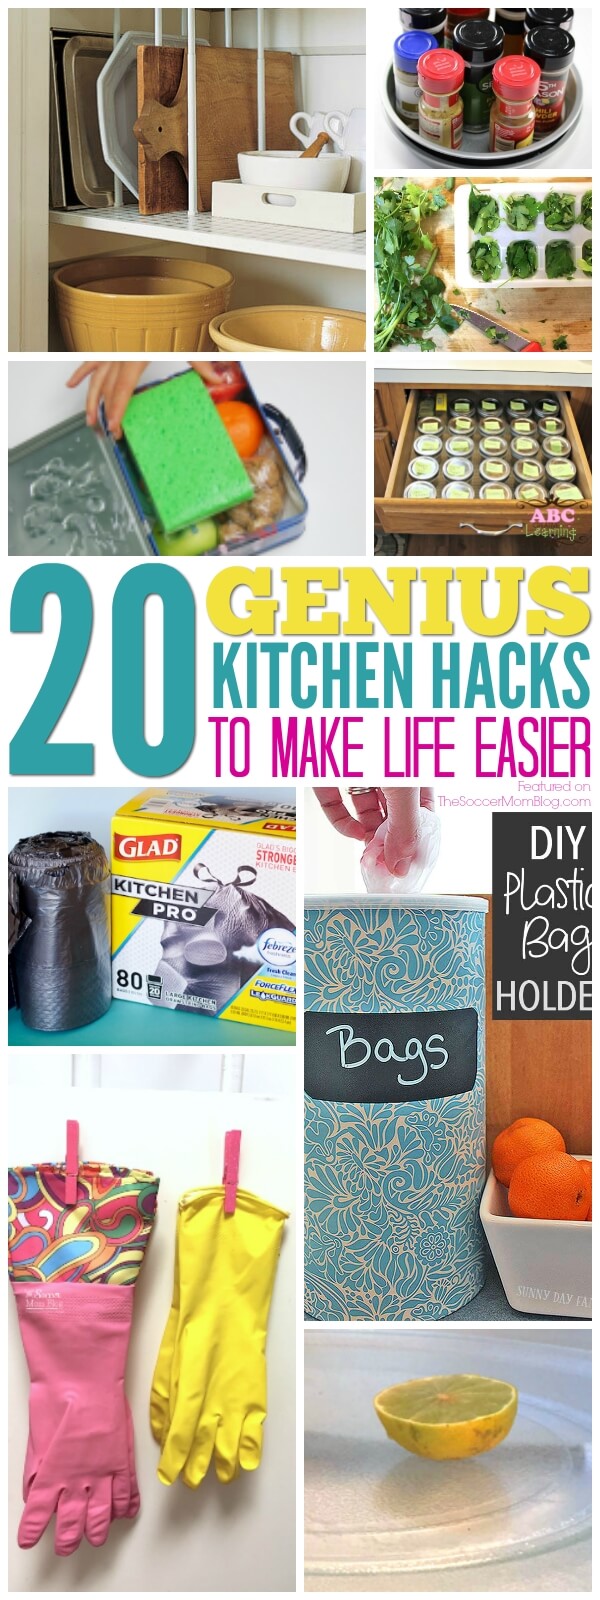 Save time, tackle clutter, and make life a little bit easier with these genius kitchen hacks from top home bloggers! Storage, organization, cleaning & more!